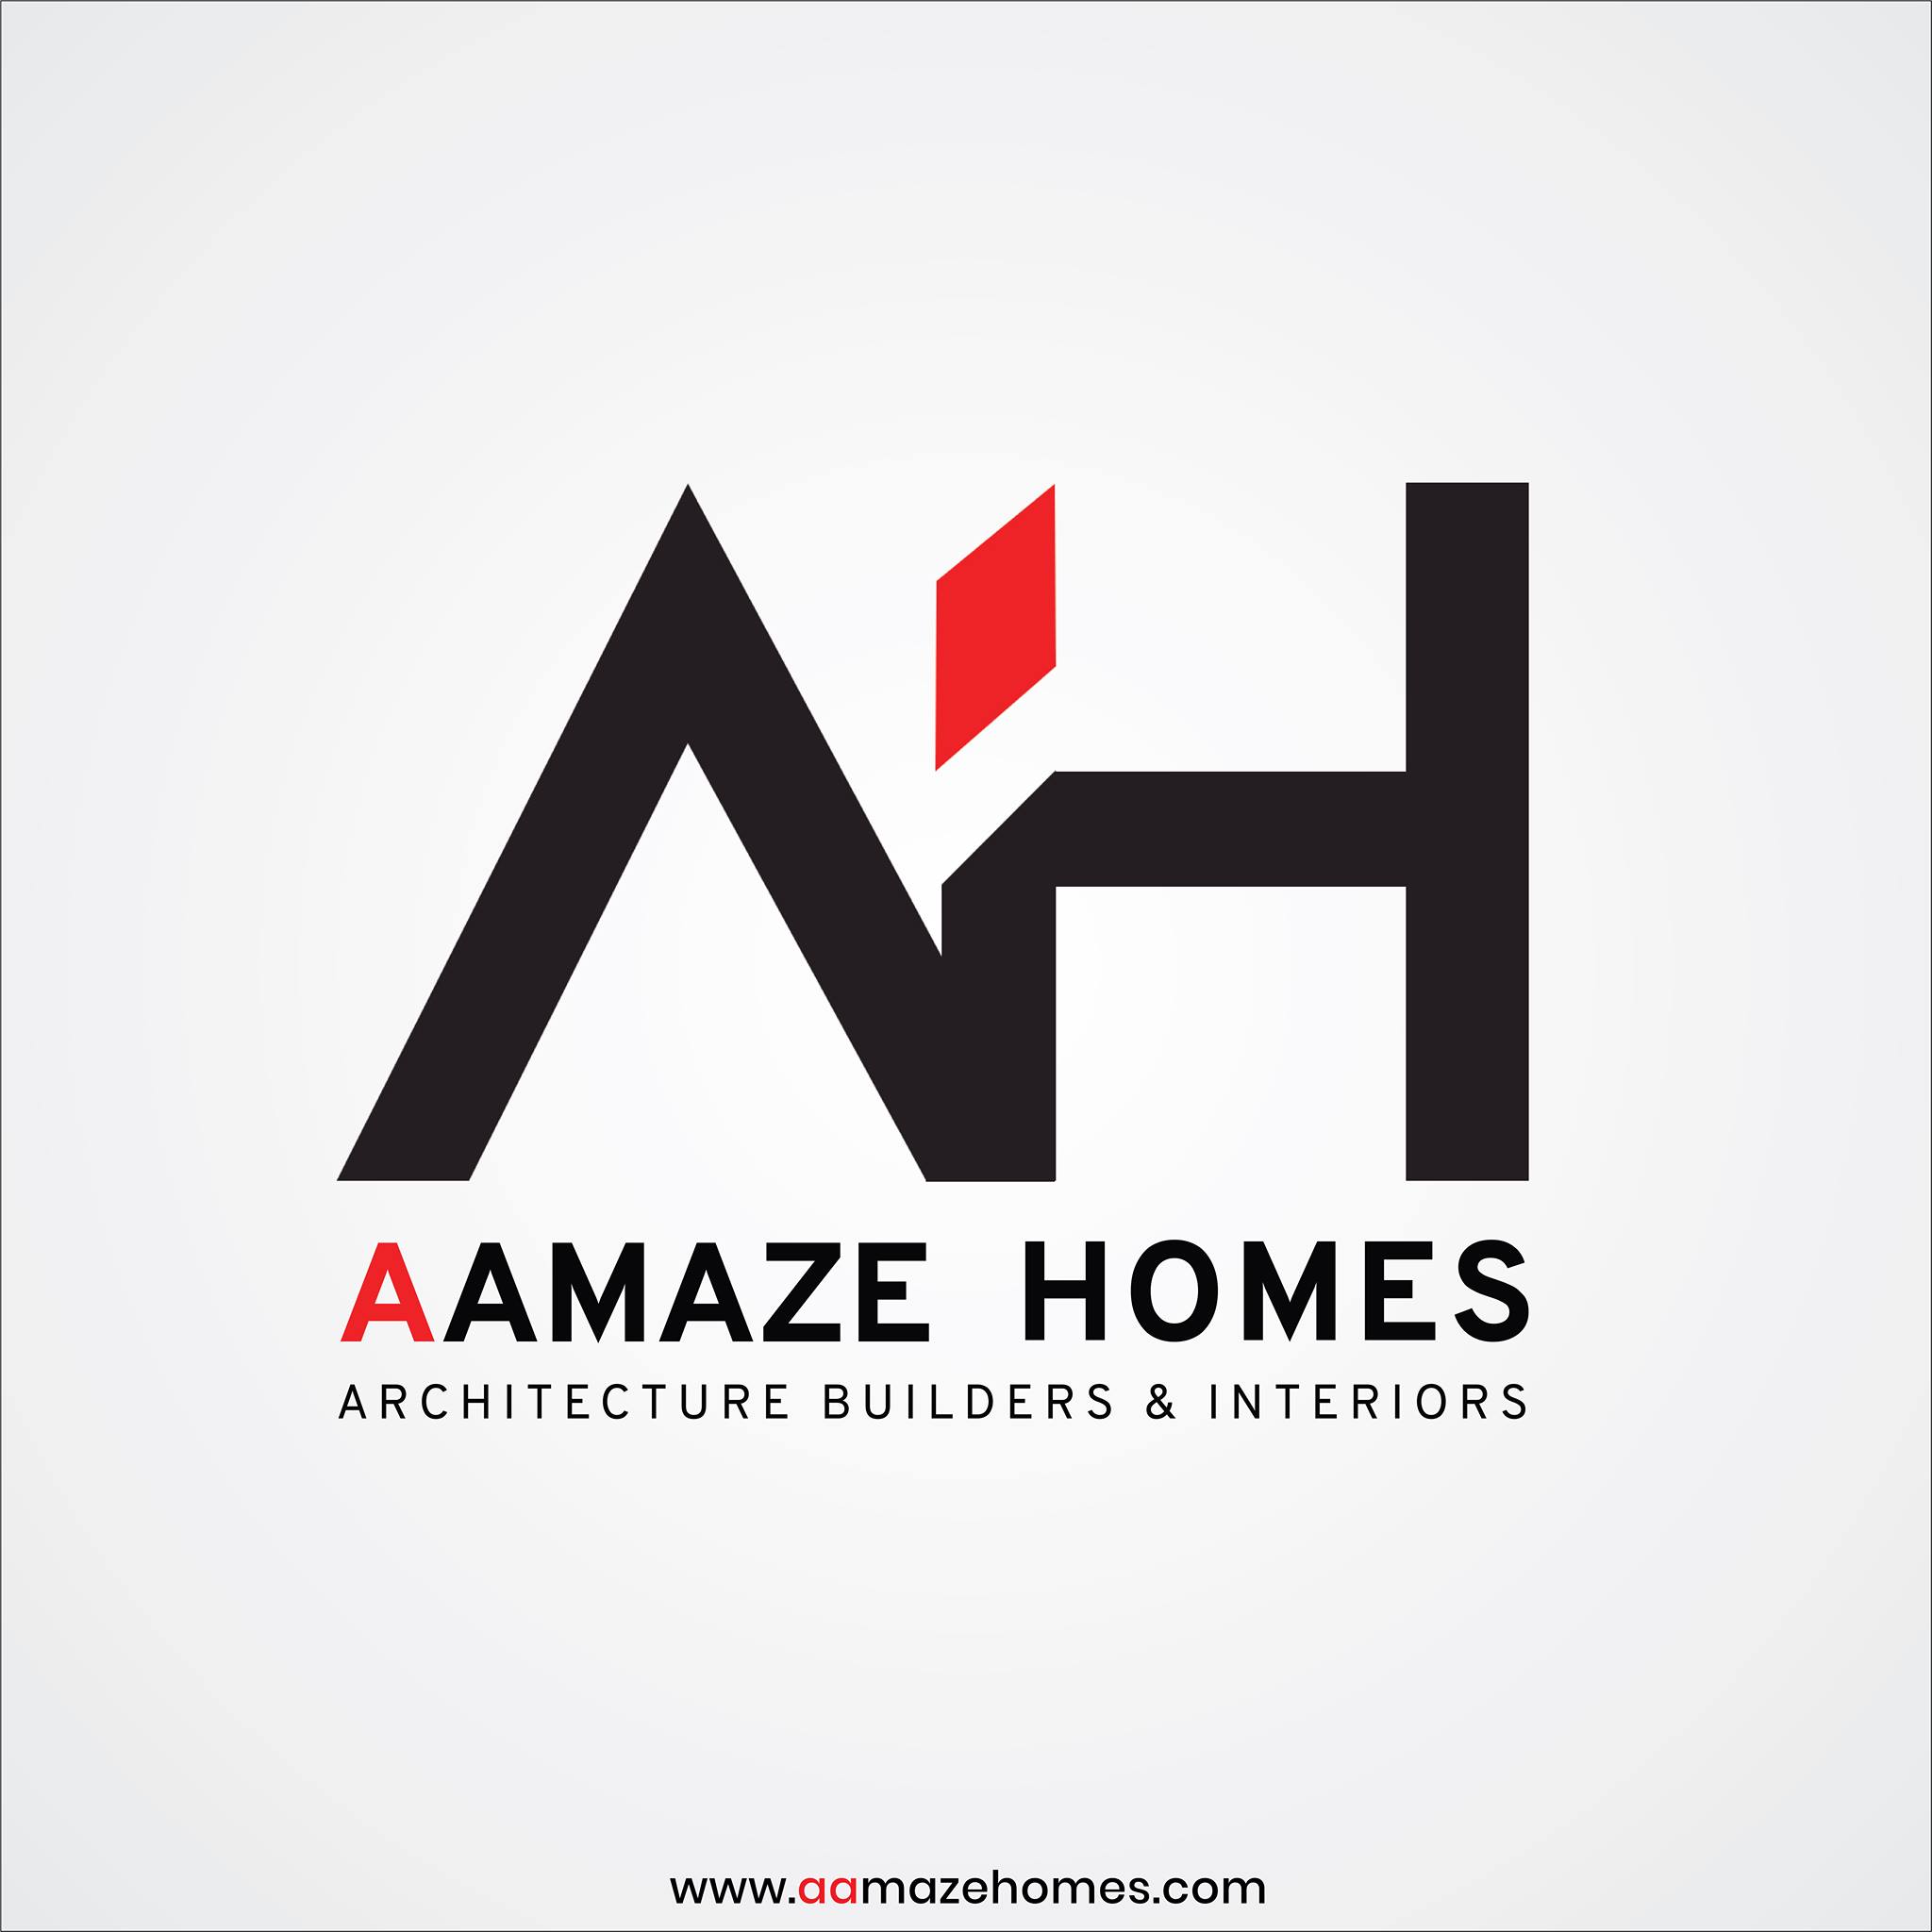 Aamaze homes Architects & Interiors|IT Services|Professional Services